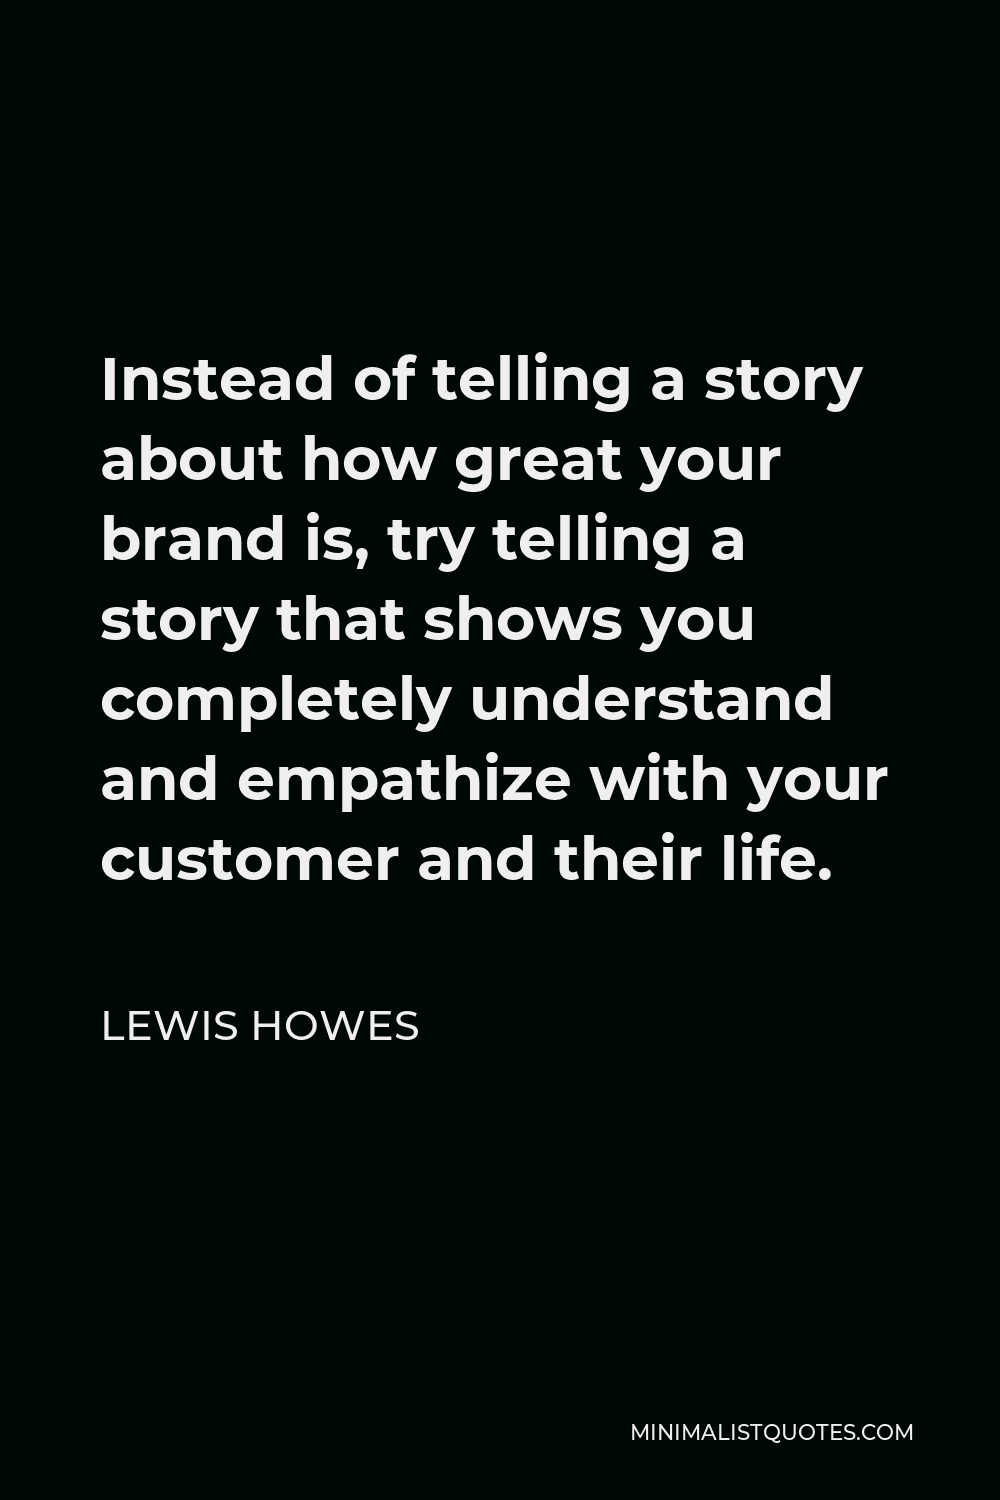 Lewis Howes Quote - Instead of telling a story about how great your brand is, try telling a story that shows you completely understand and empathize with your customer and their life.